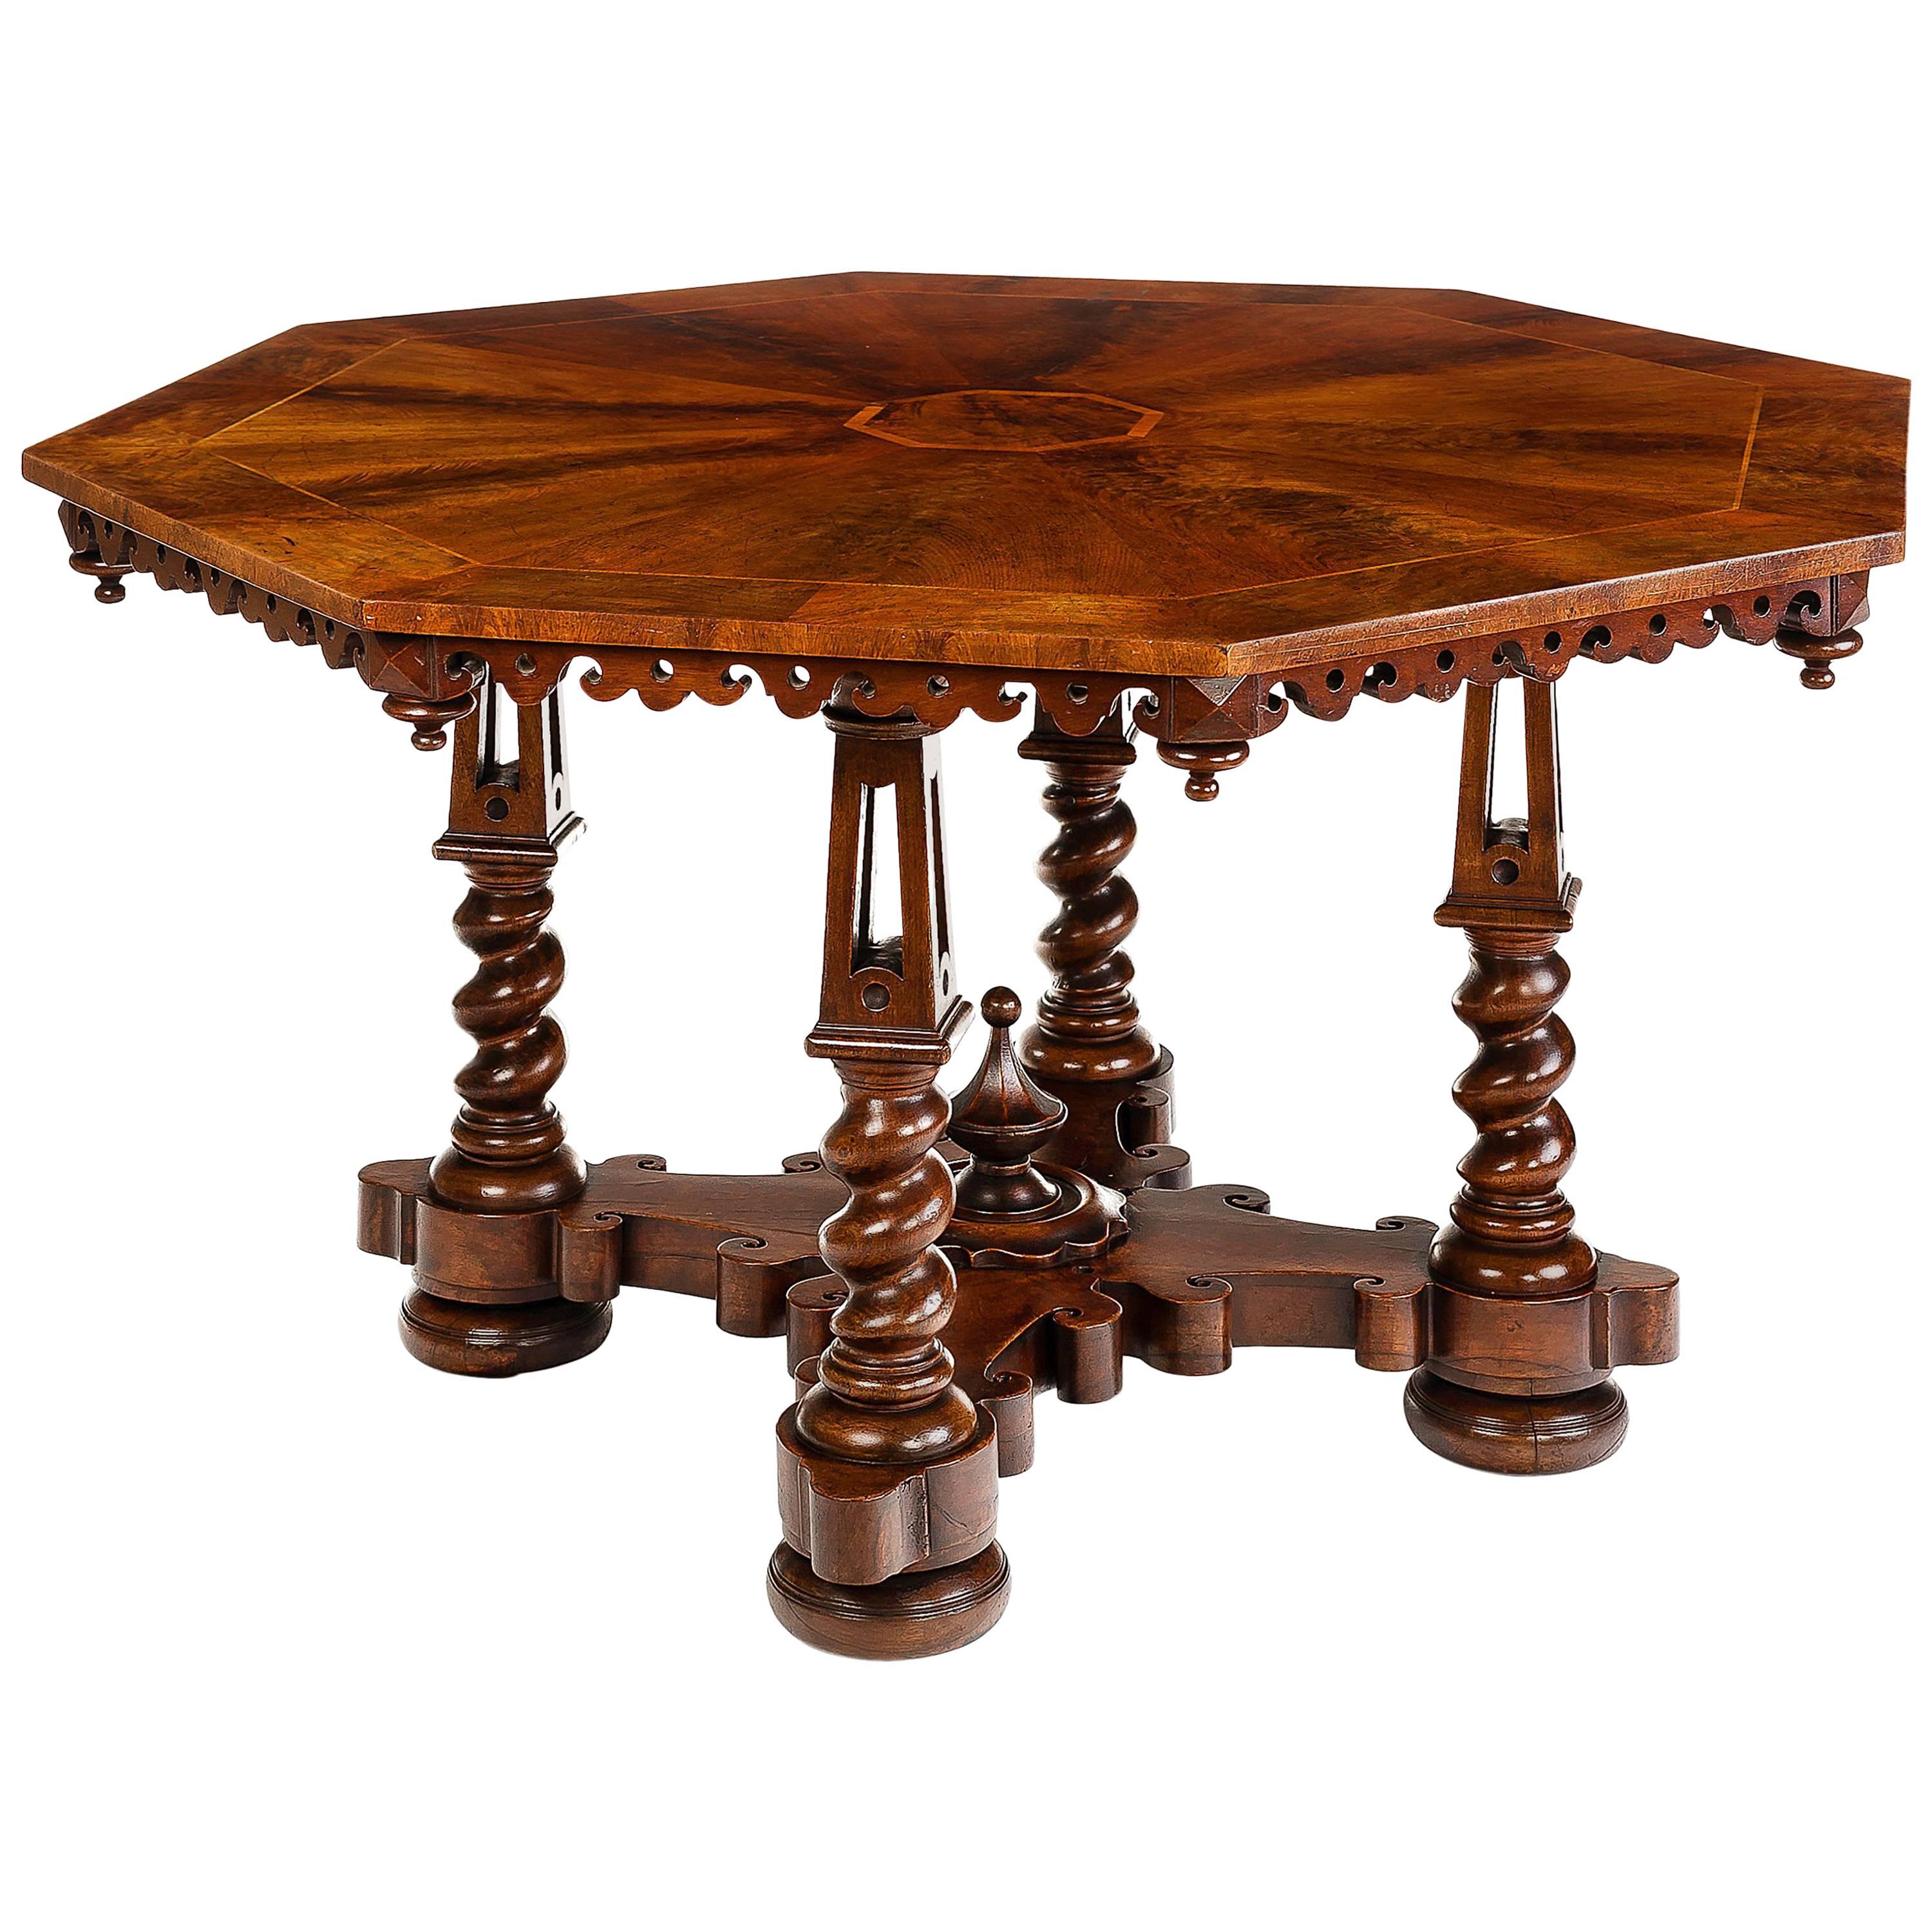 Early Victorian Walnut Centre Table Attributed to Willement